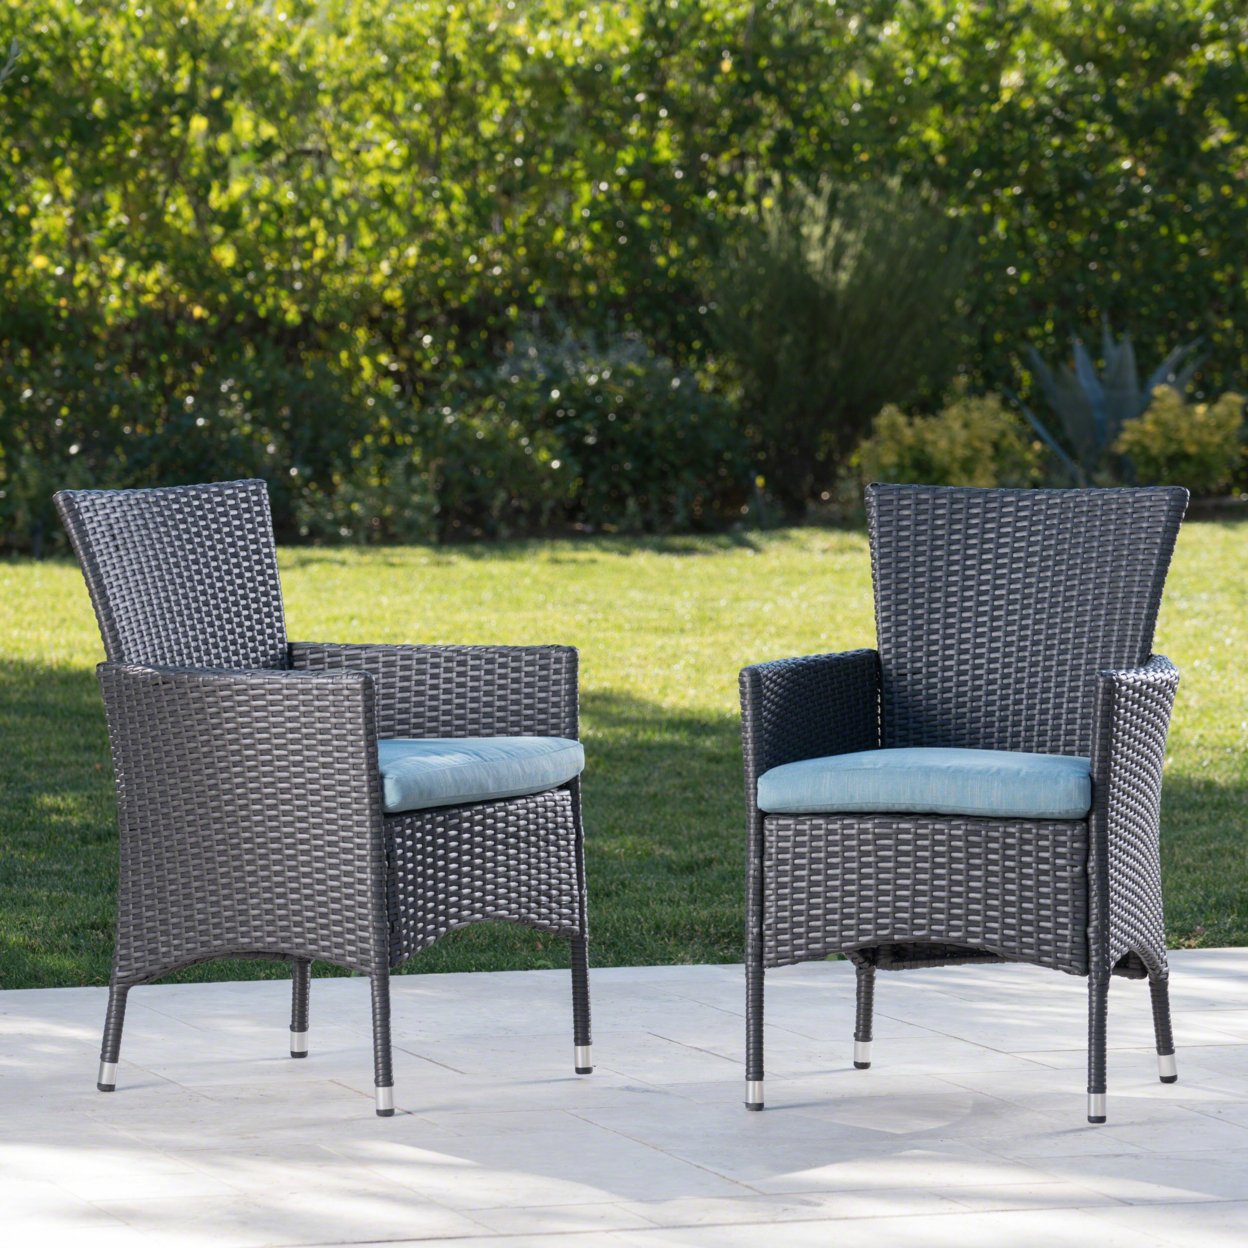 Curtis Outdoor Wicker Dining Chairs With Water Resistant Cushions - Set Of 2 - Gray/Teal